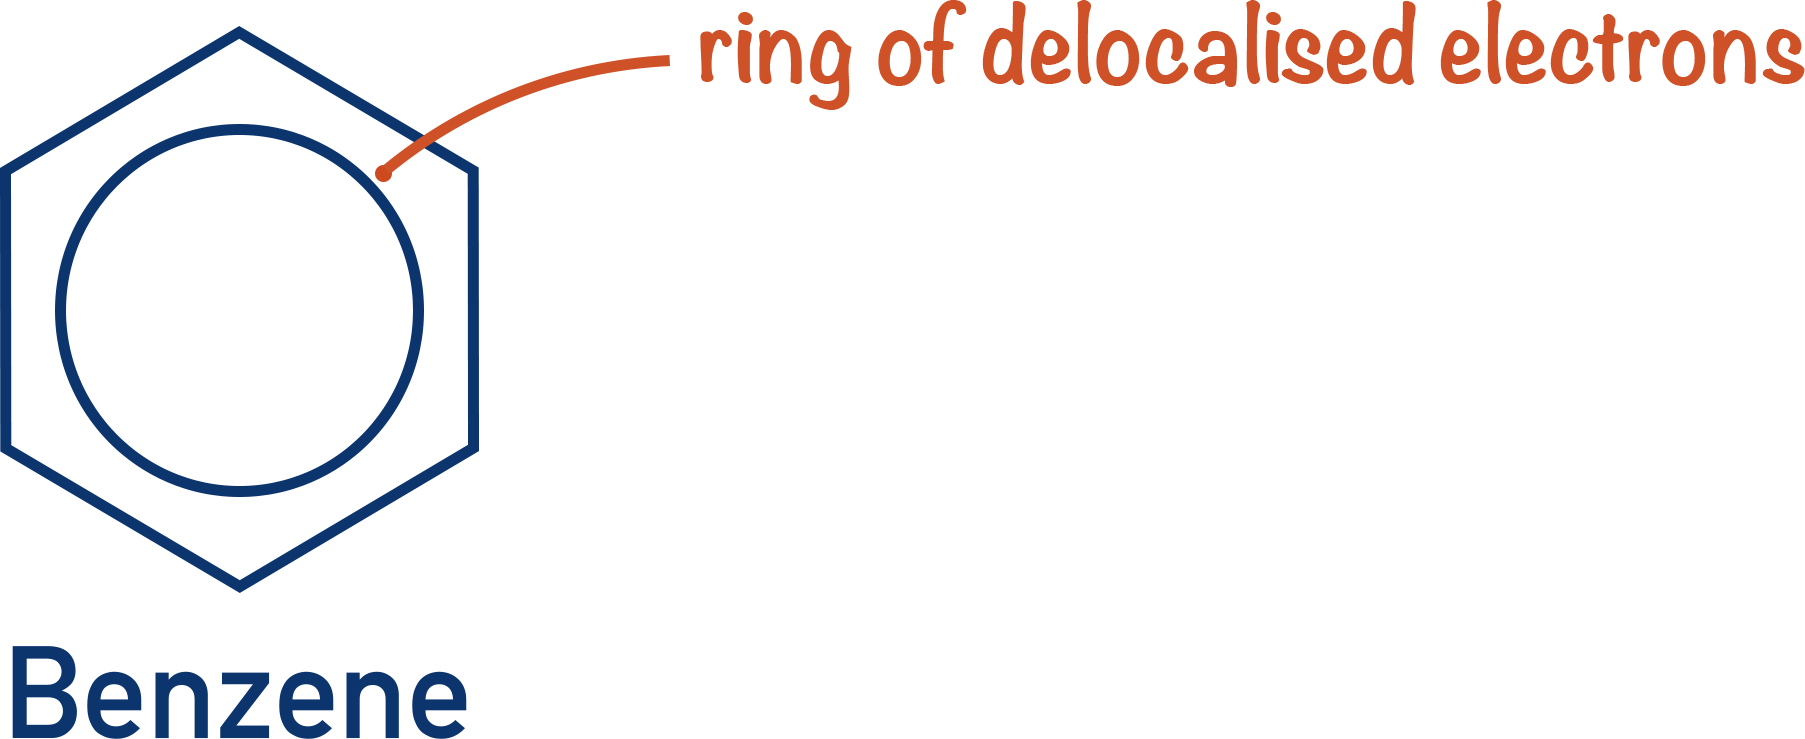 structure of benzene delocalised electrons ring density